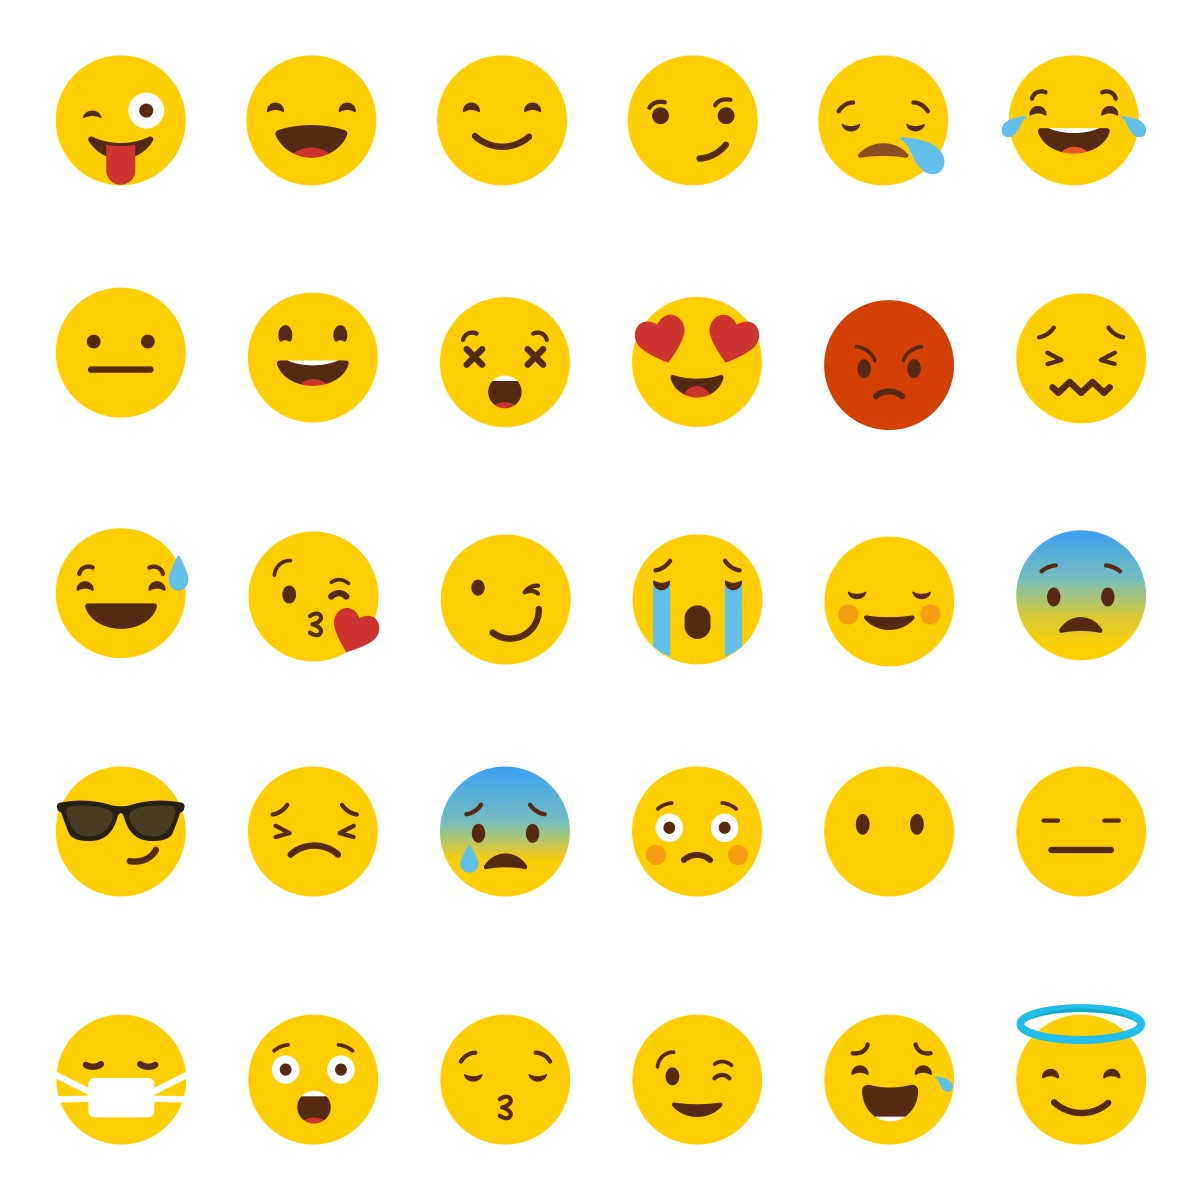 The History of Emojis